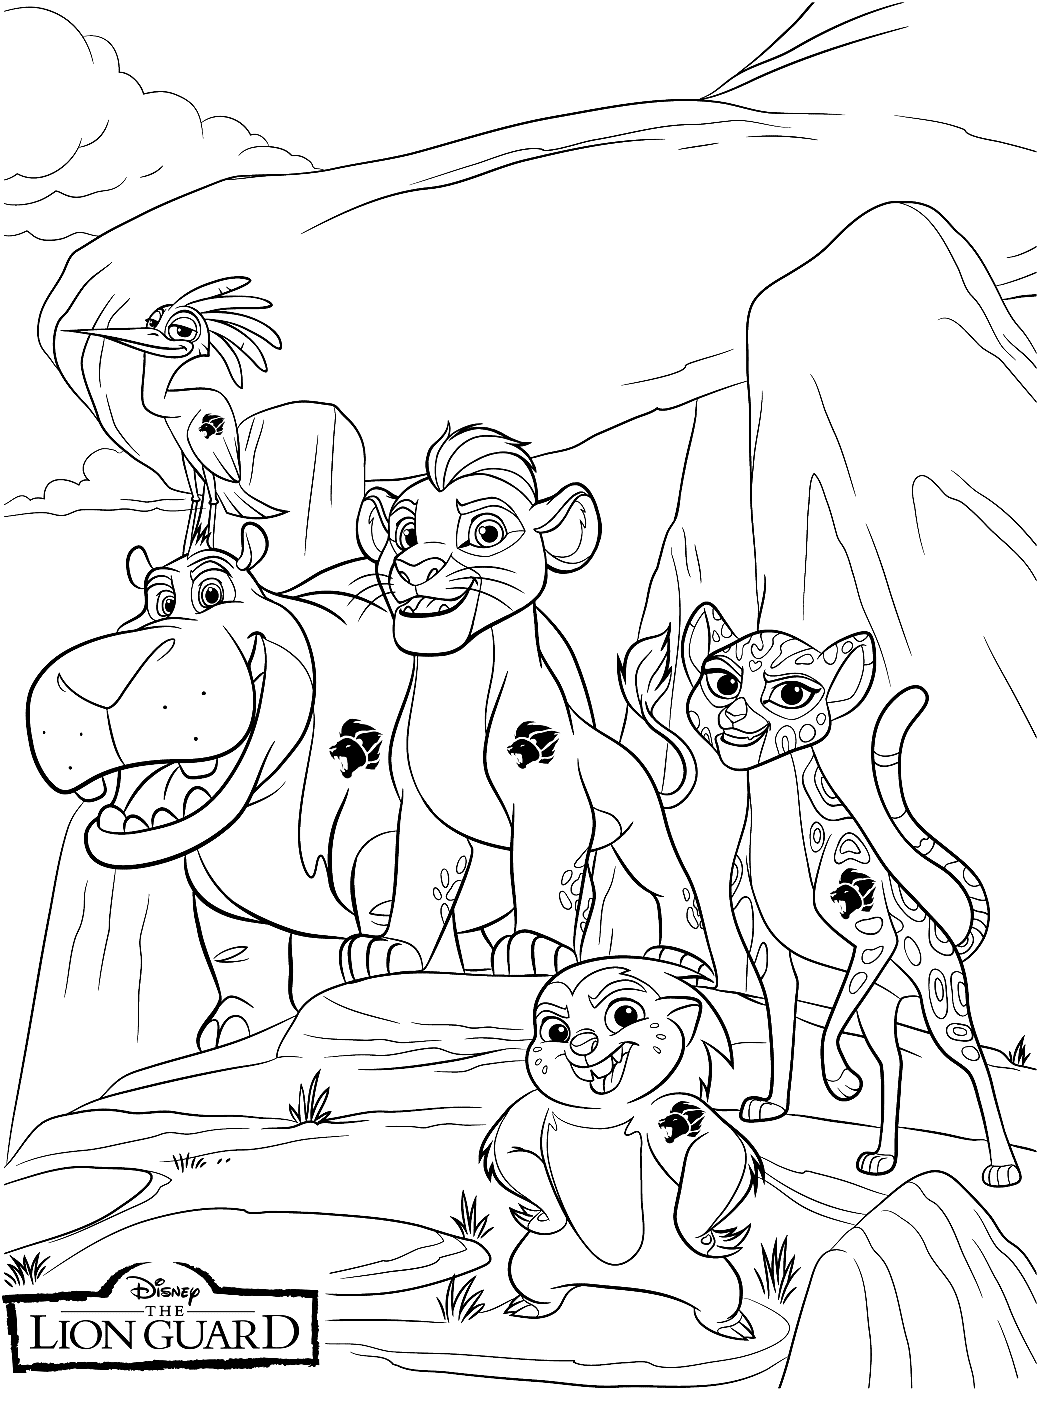 Meet The Lion Guard Coloring Page